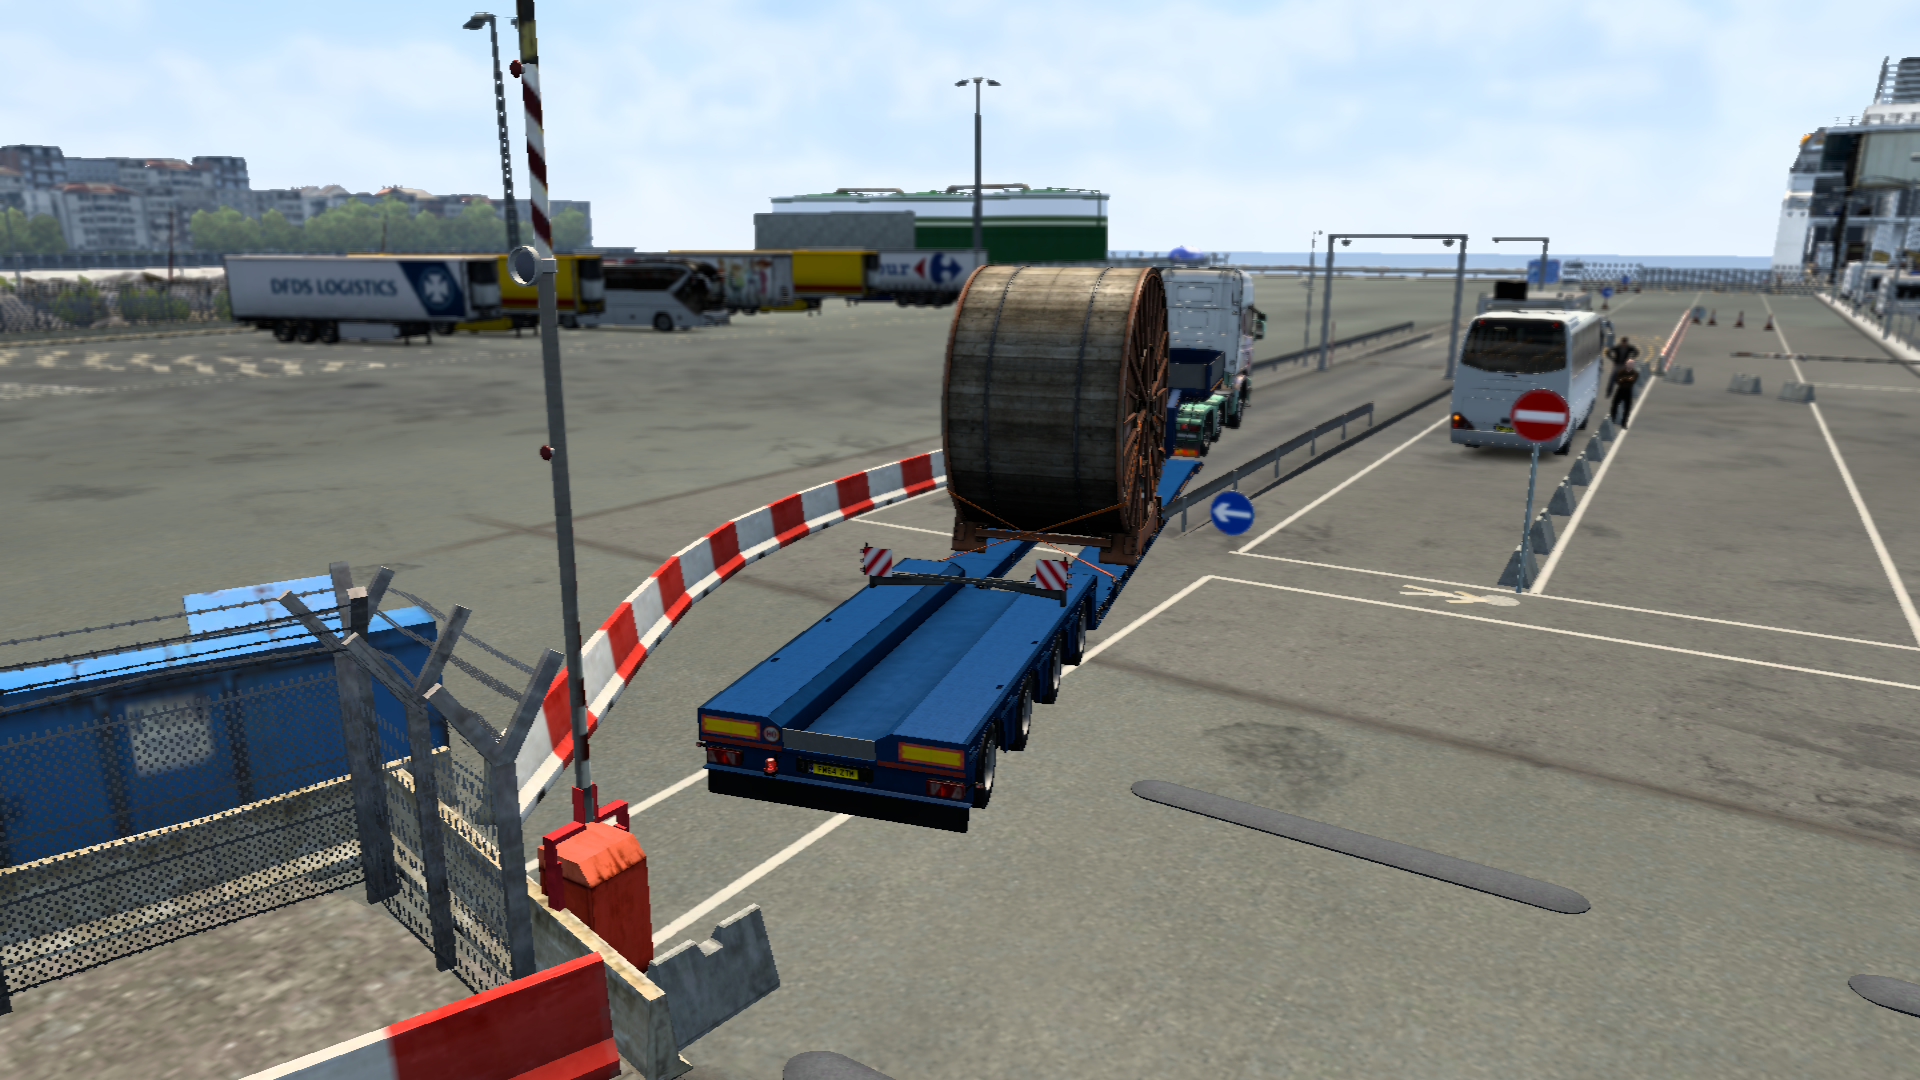 ets2_20211102_234512_00.png